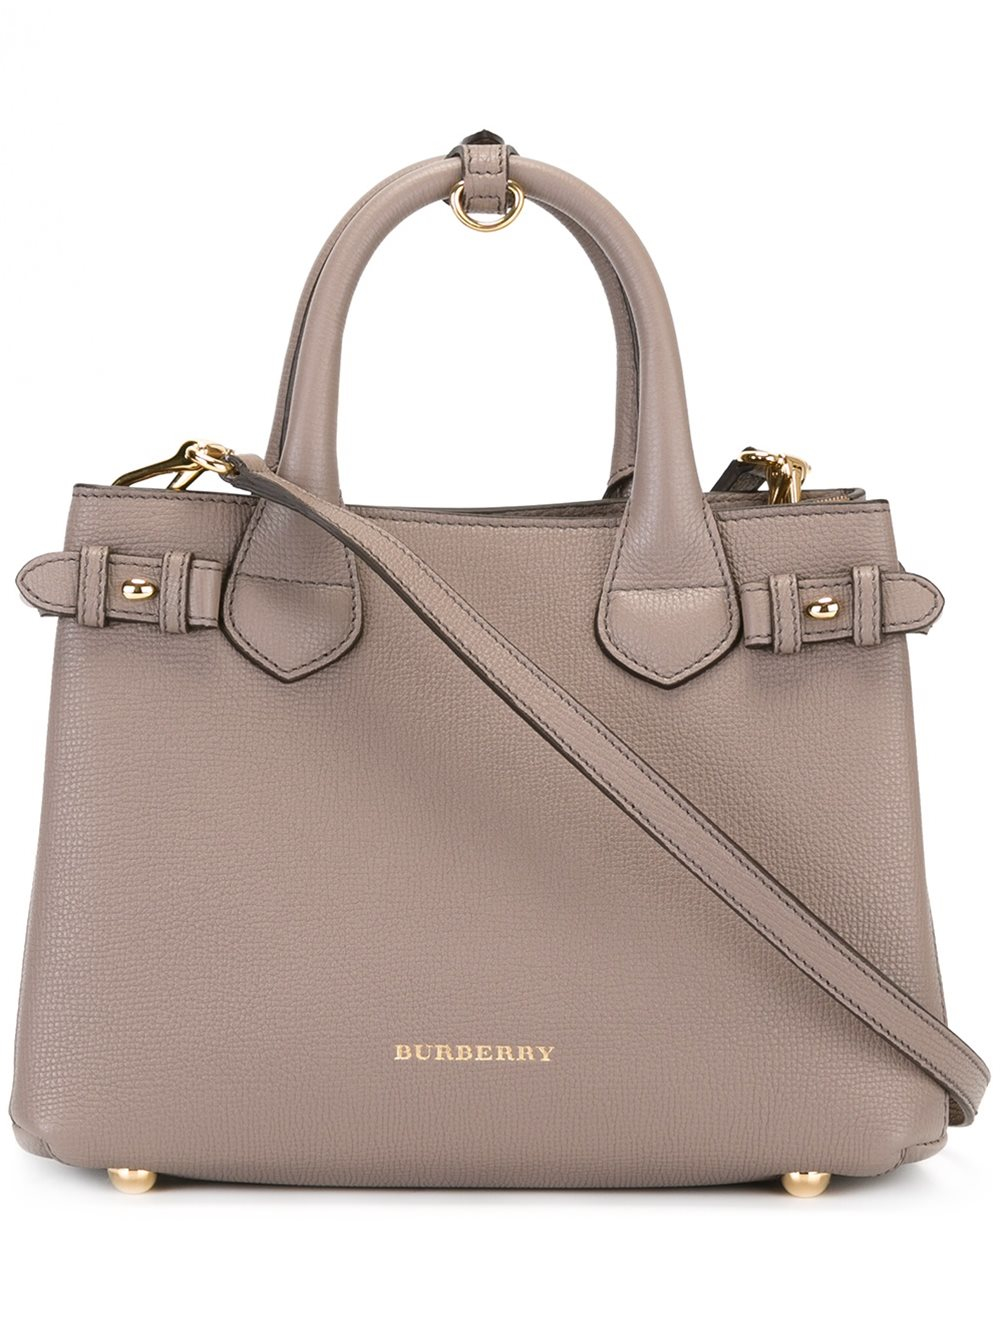 Lyst - Burberry The Banner Leather And House Check Tote Bag in Gray